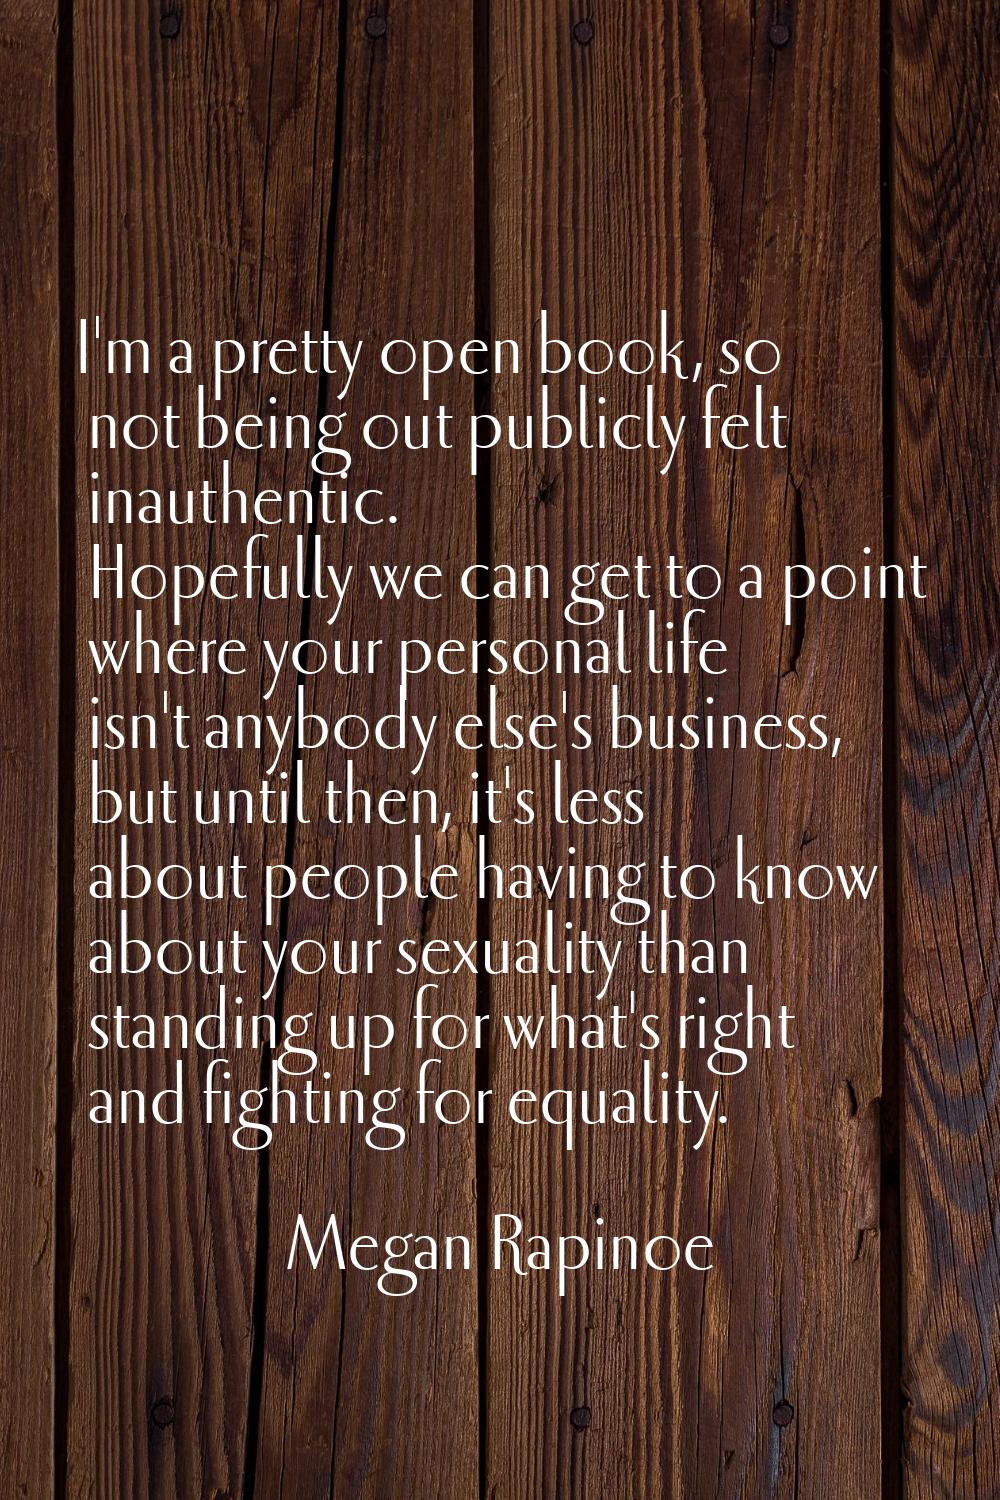 I'm a pretty open book, so not being out publicly felt inauthentic. Hopefully we can get to a point